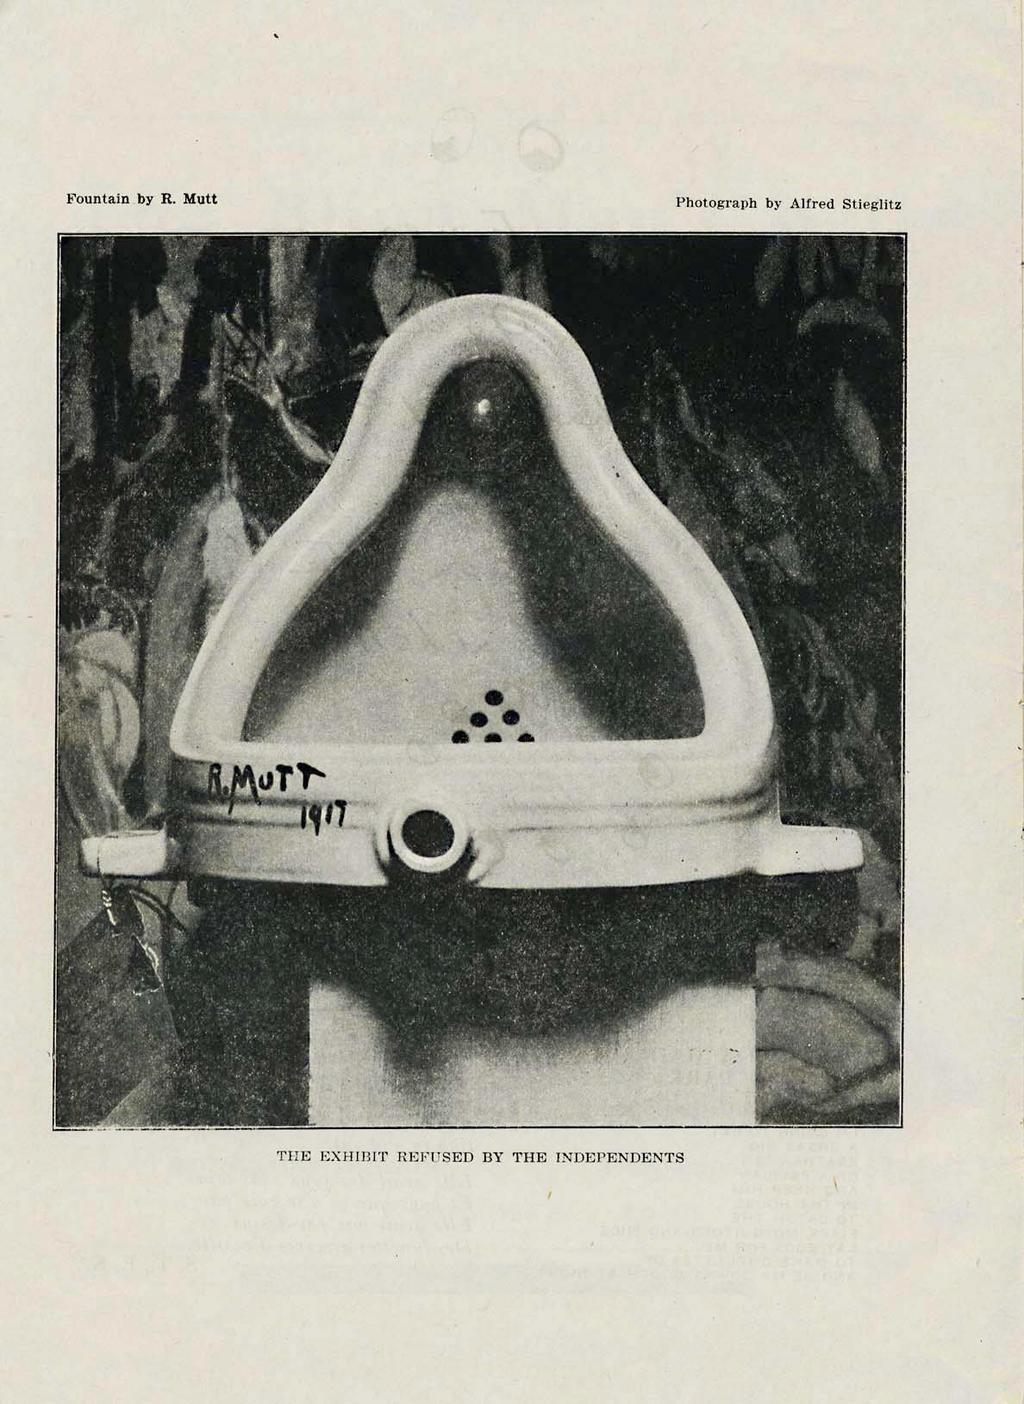 Art creating controversy: Porcelain urinal inscribed "R. Mutt 1917." Marcel Duchamp, Fountain 1917.